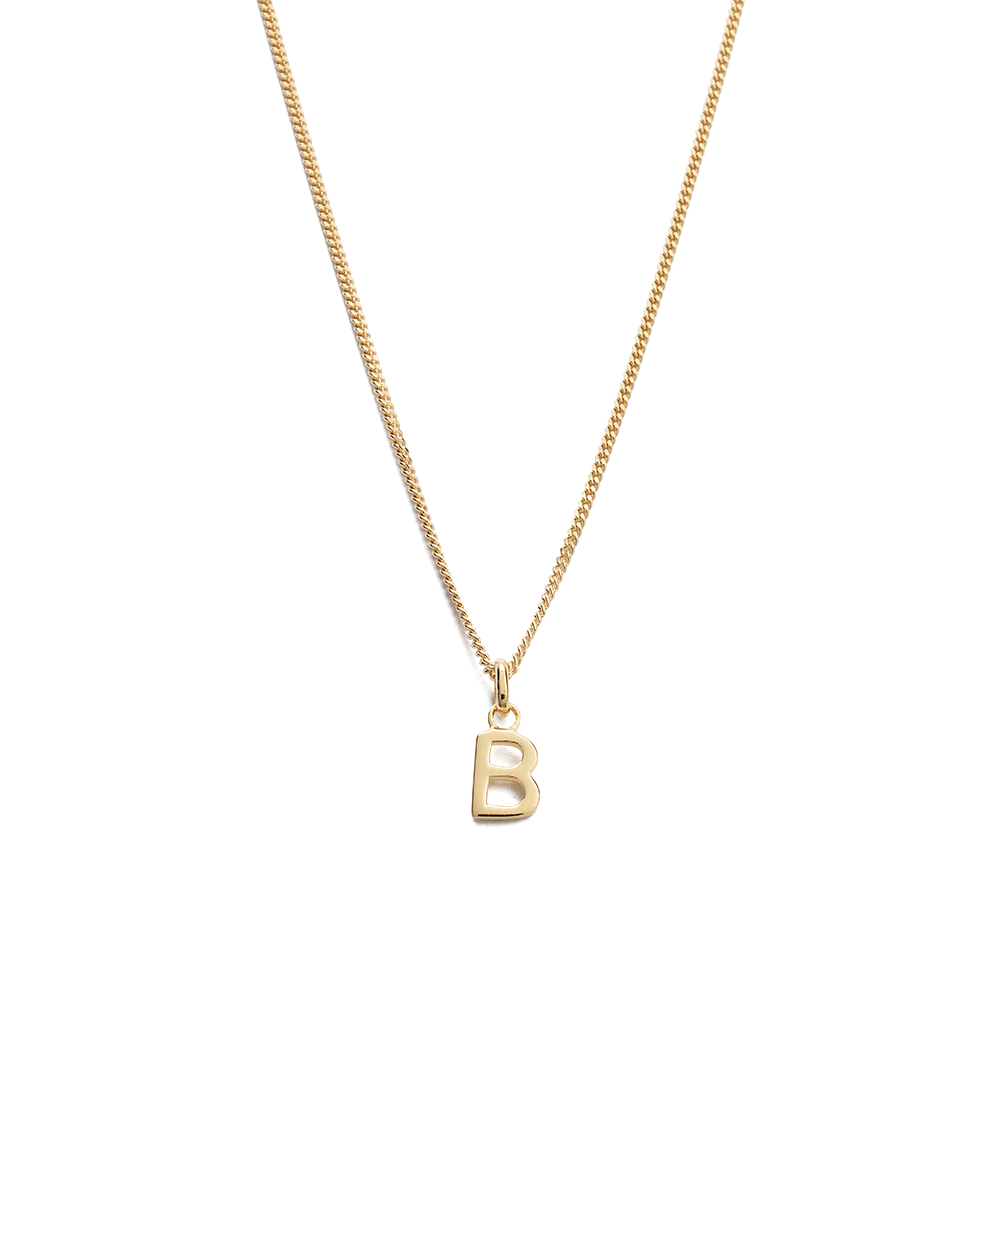 Initials Pendant Necklace in 18K Gold Plating - MYKA